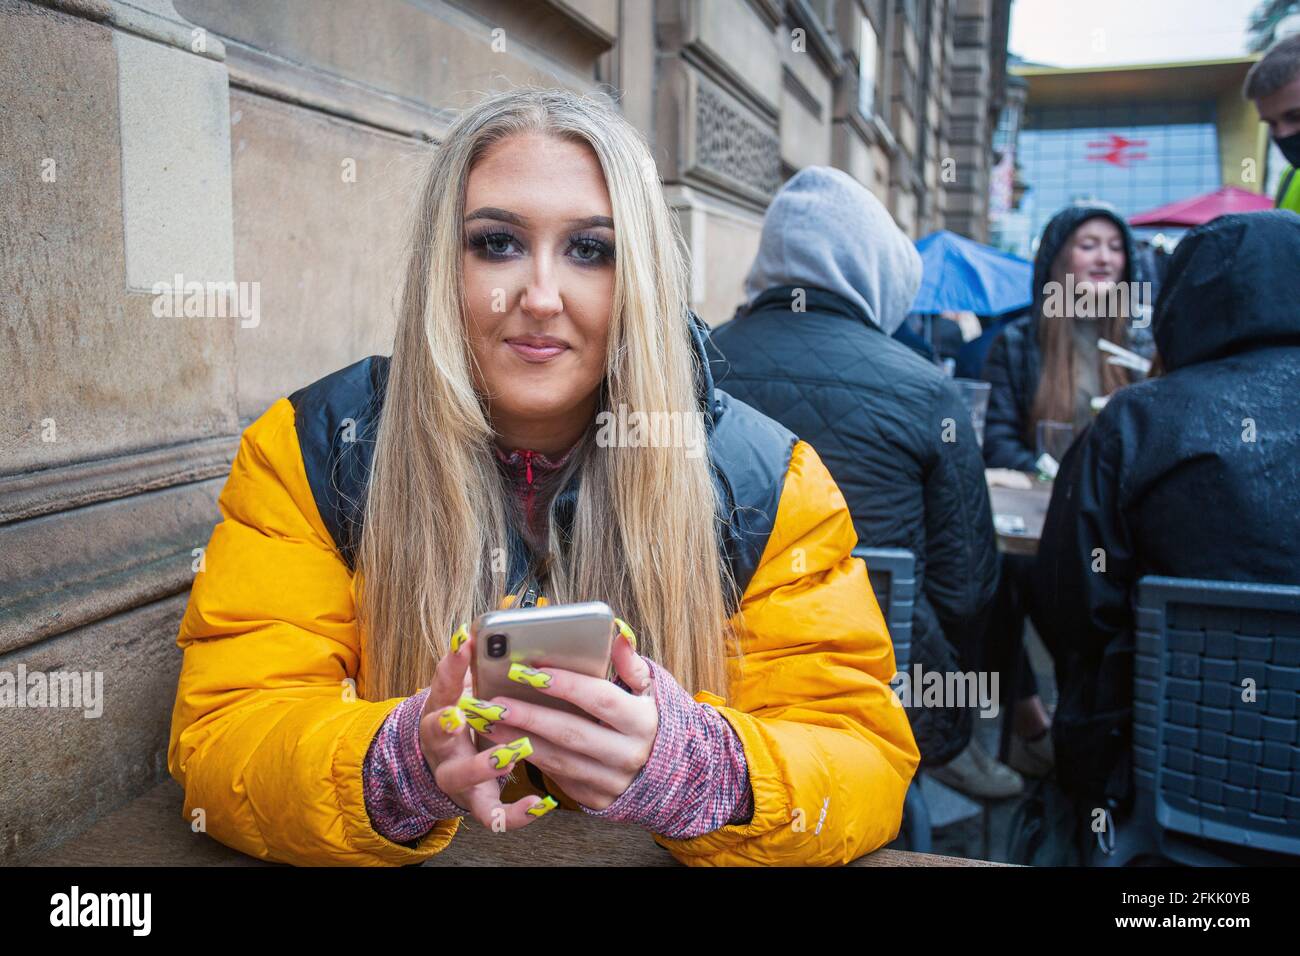 Young woman with manicured acrylic long nails using mobile phone in Glasgow, Scotland Stock Photo